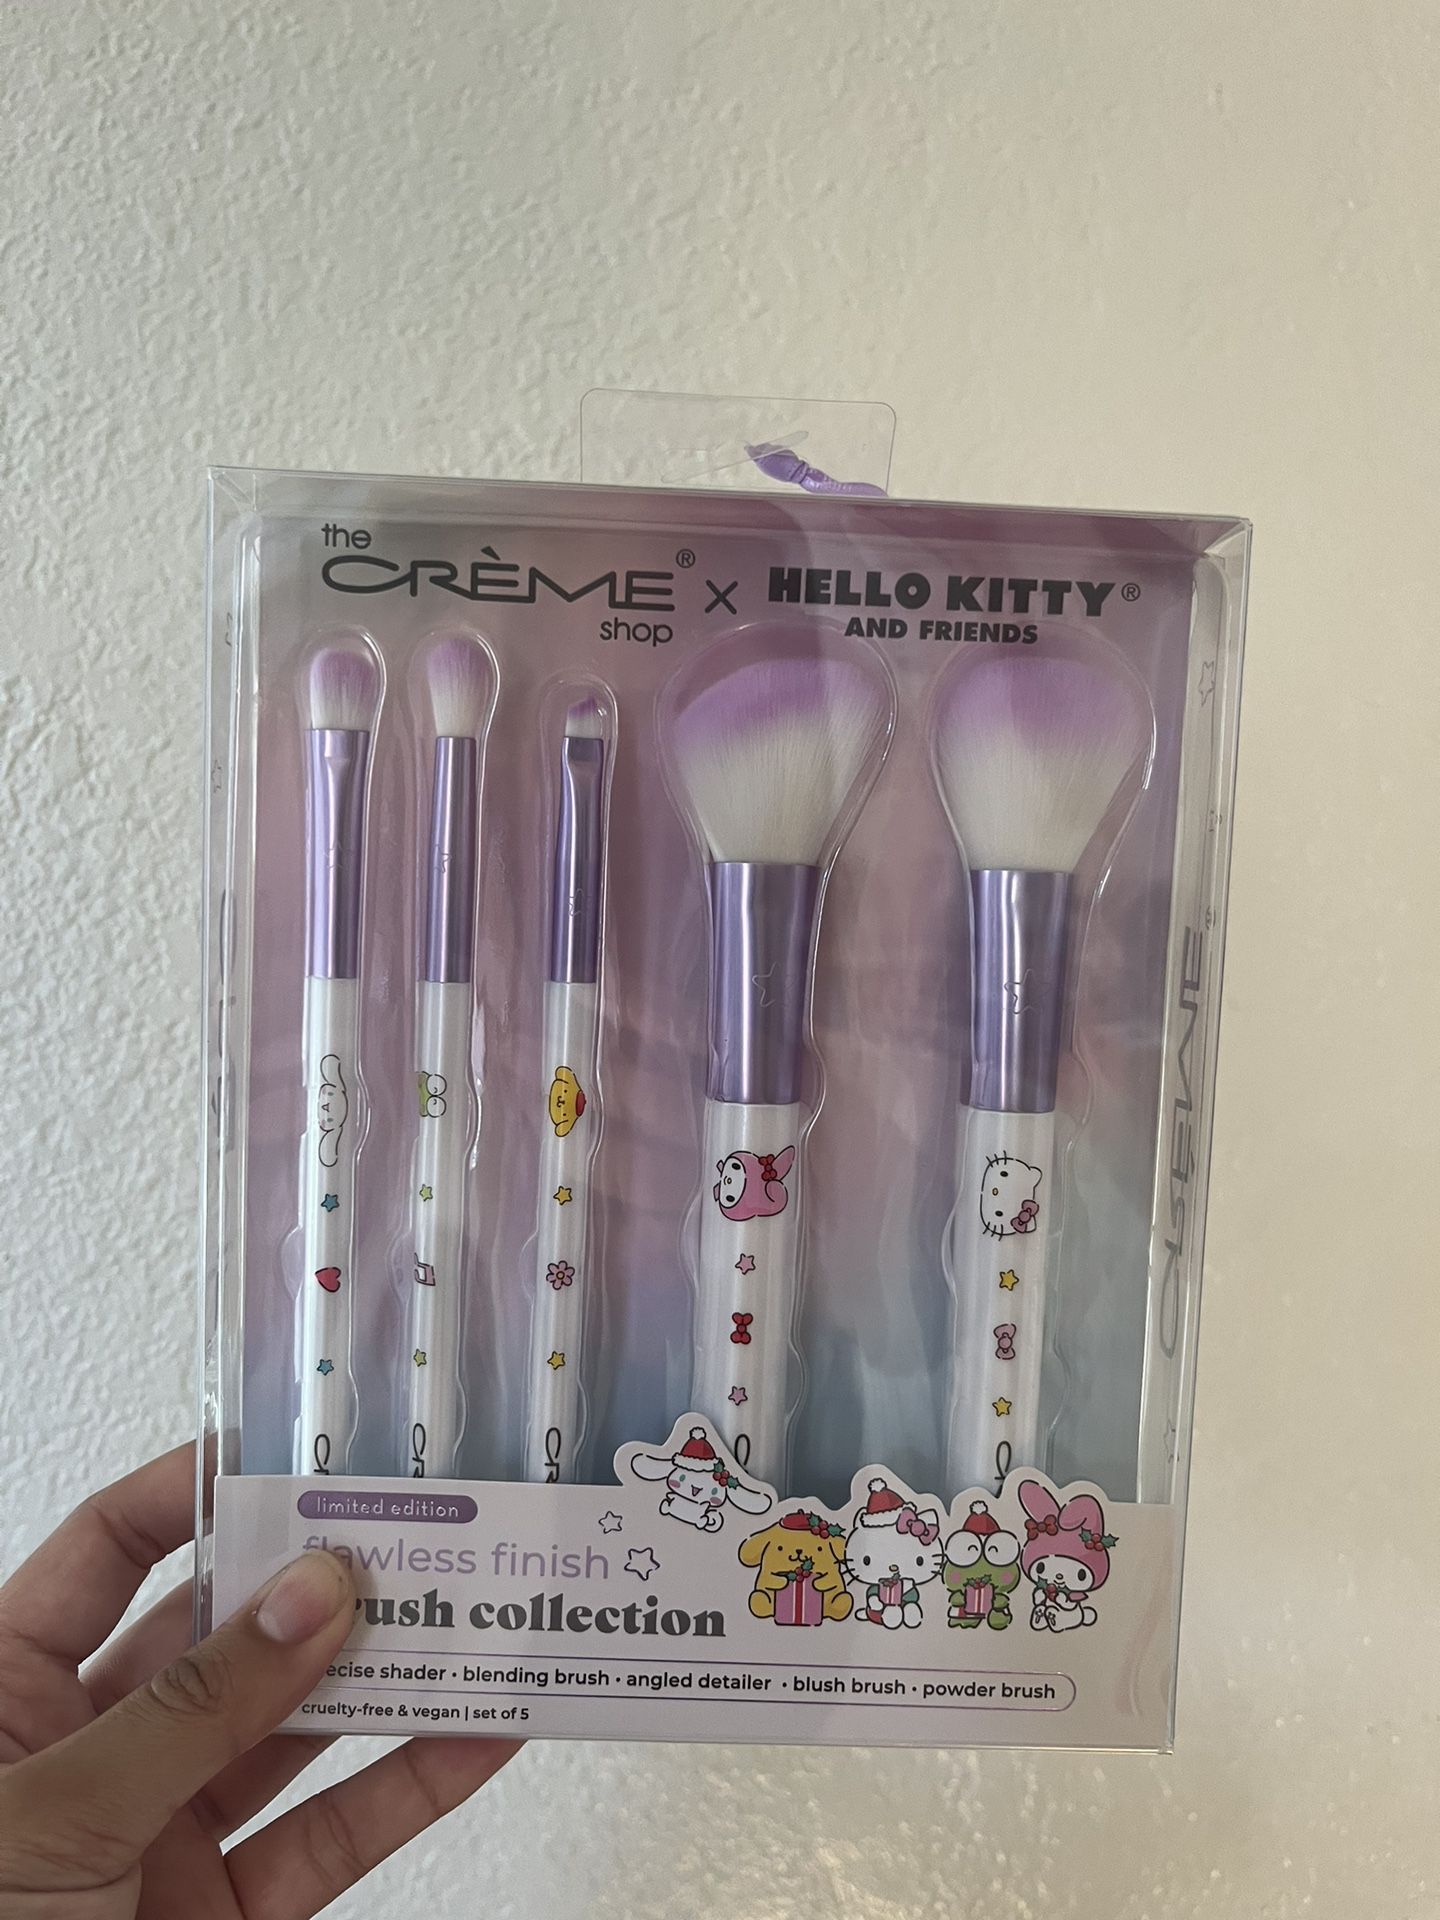 Hello Kitty & Friends Makeup Brushes $20